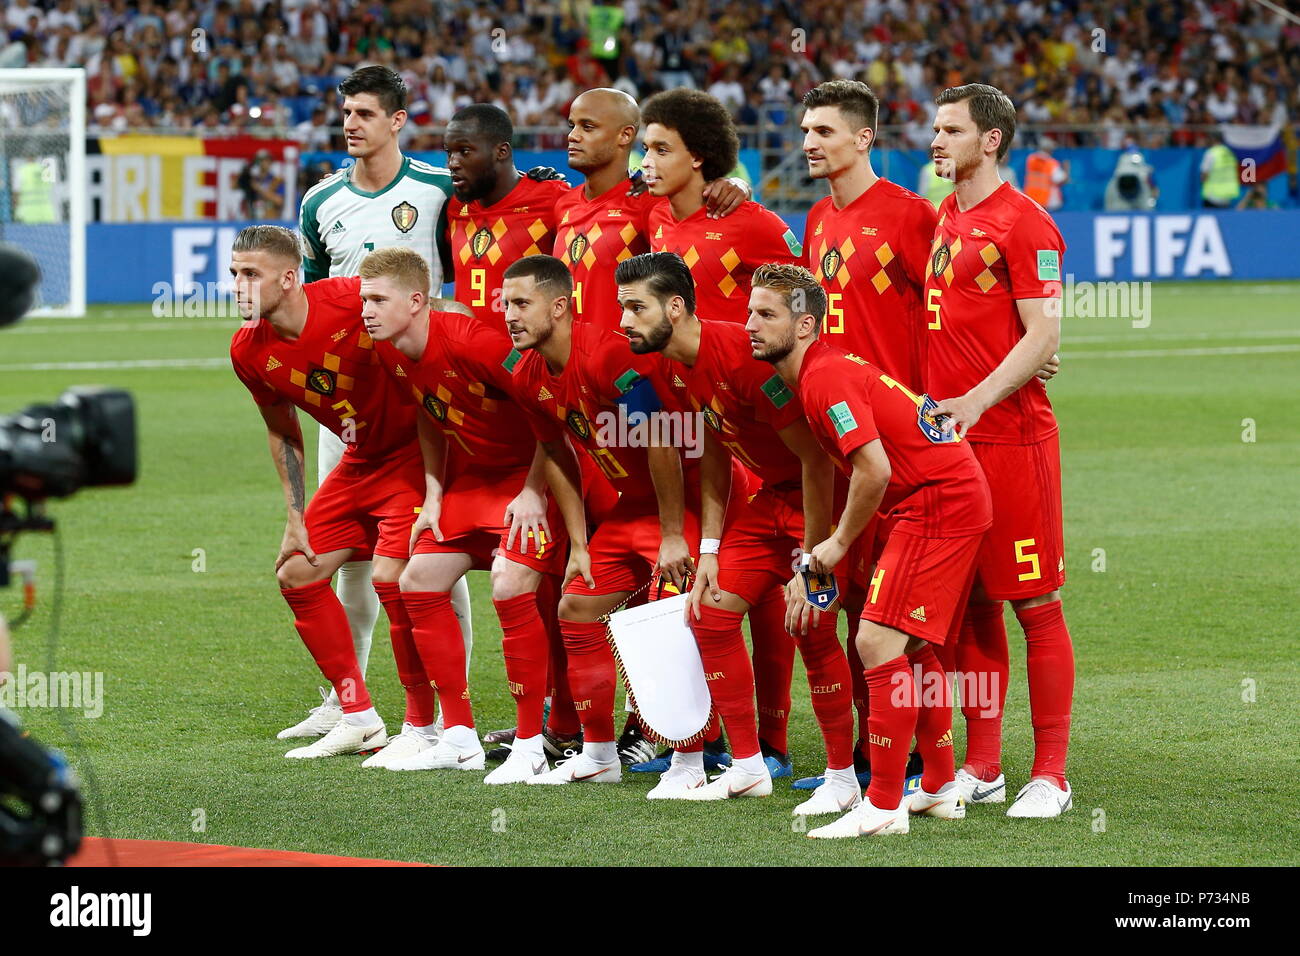 Rostov On Don Russia 2nd July 2018 Belgium Team Group Line Up Bel Football Soccer Fifa World Cup Russia 2018 Match Between Belgium 3 2 Japan At The Rostov Arena In Rostov On Don